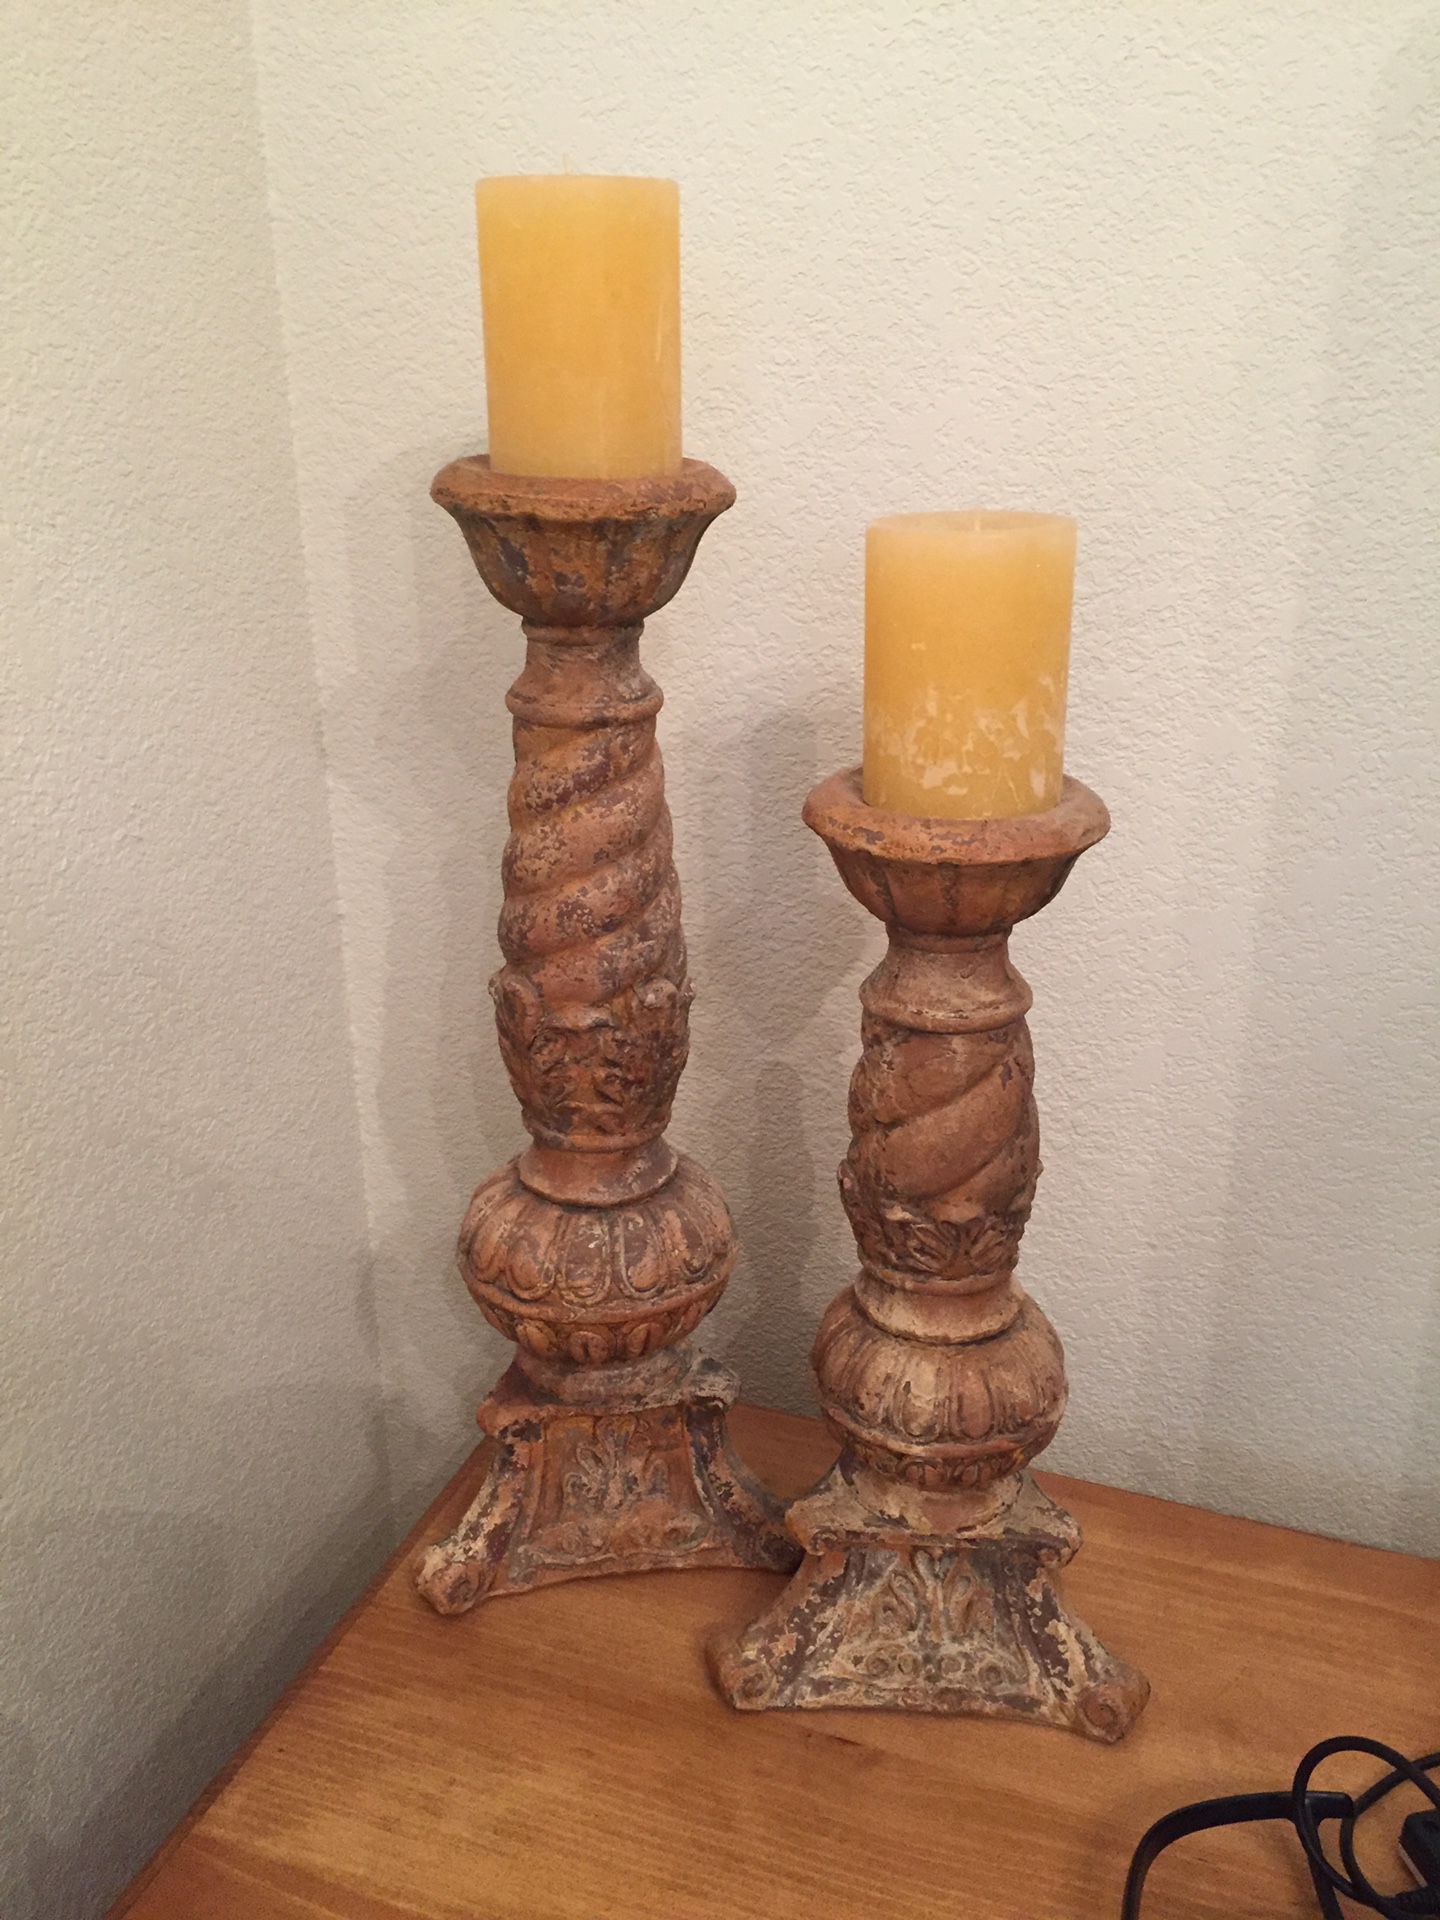 Candle and lamps